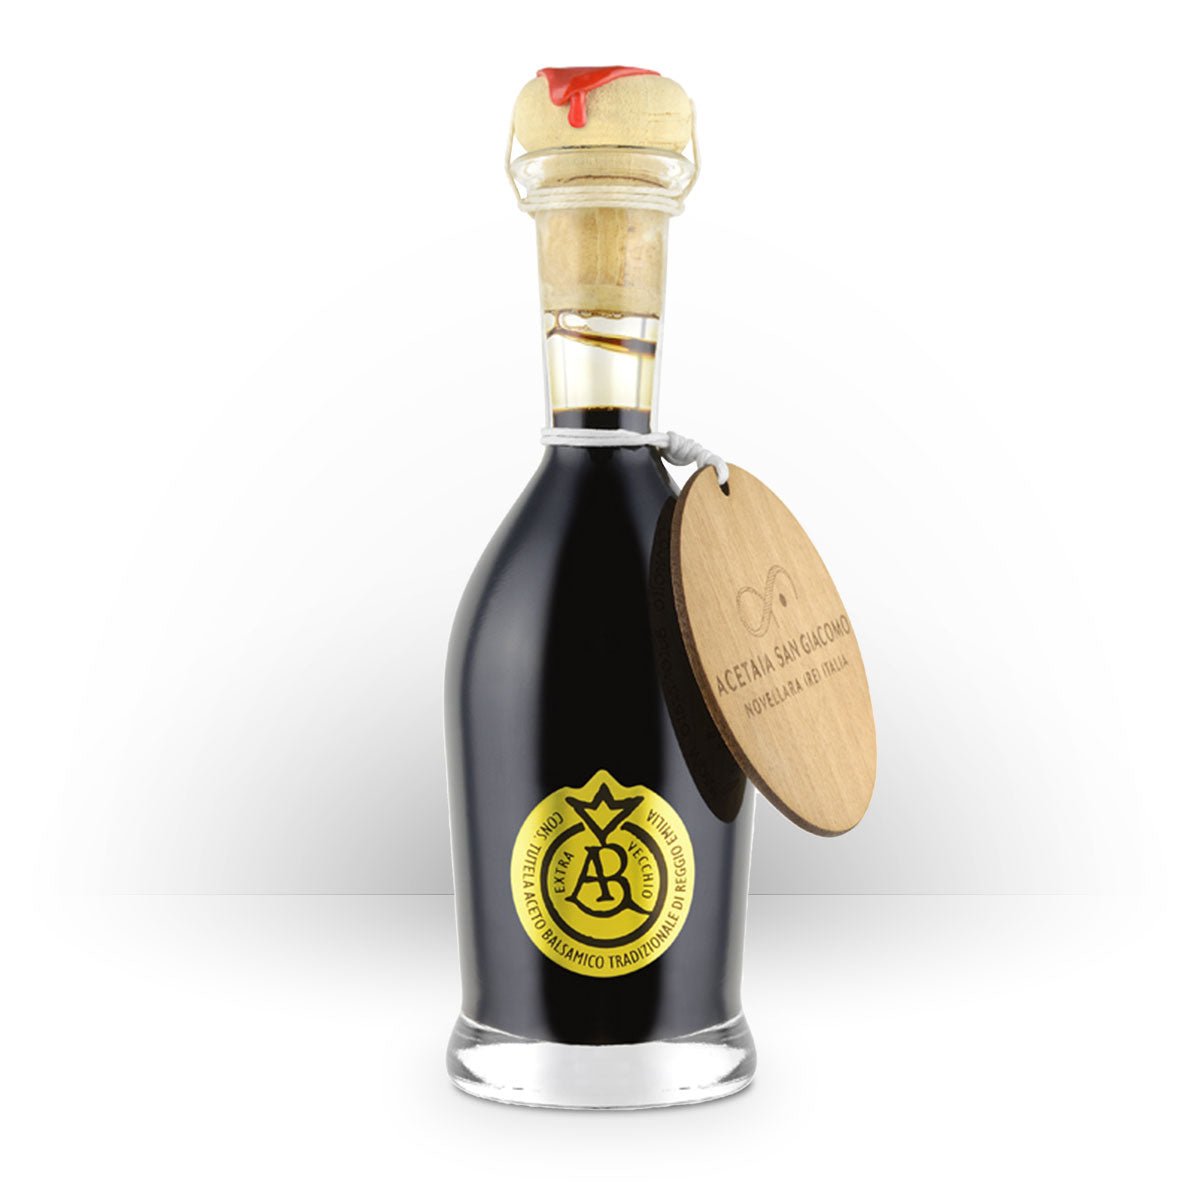 Traditional Balsamic Vinegar 25 Year Gold Label - Product not always available 